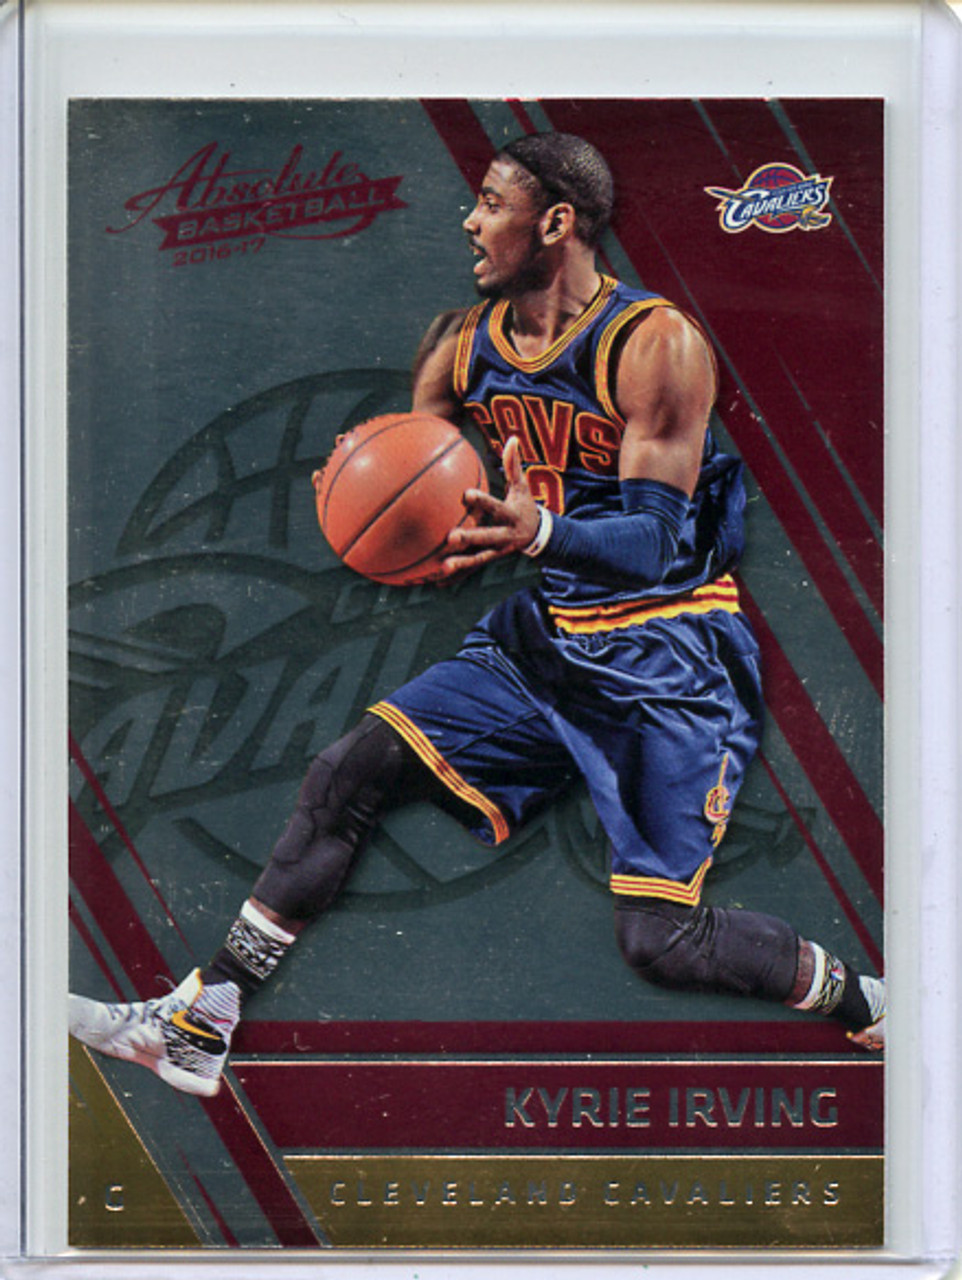 Kyrie Irving 2016-17 Absolute #80